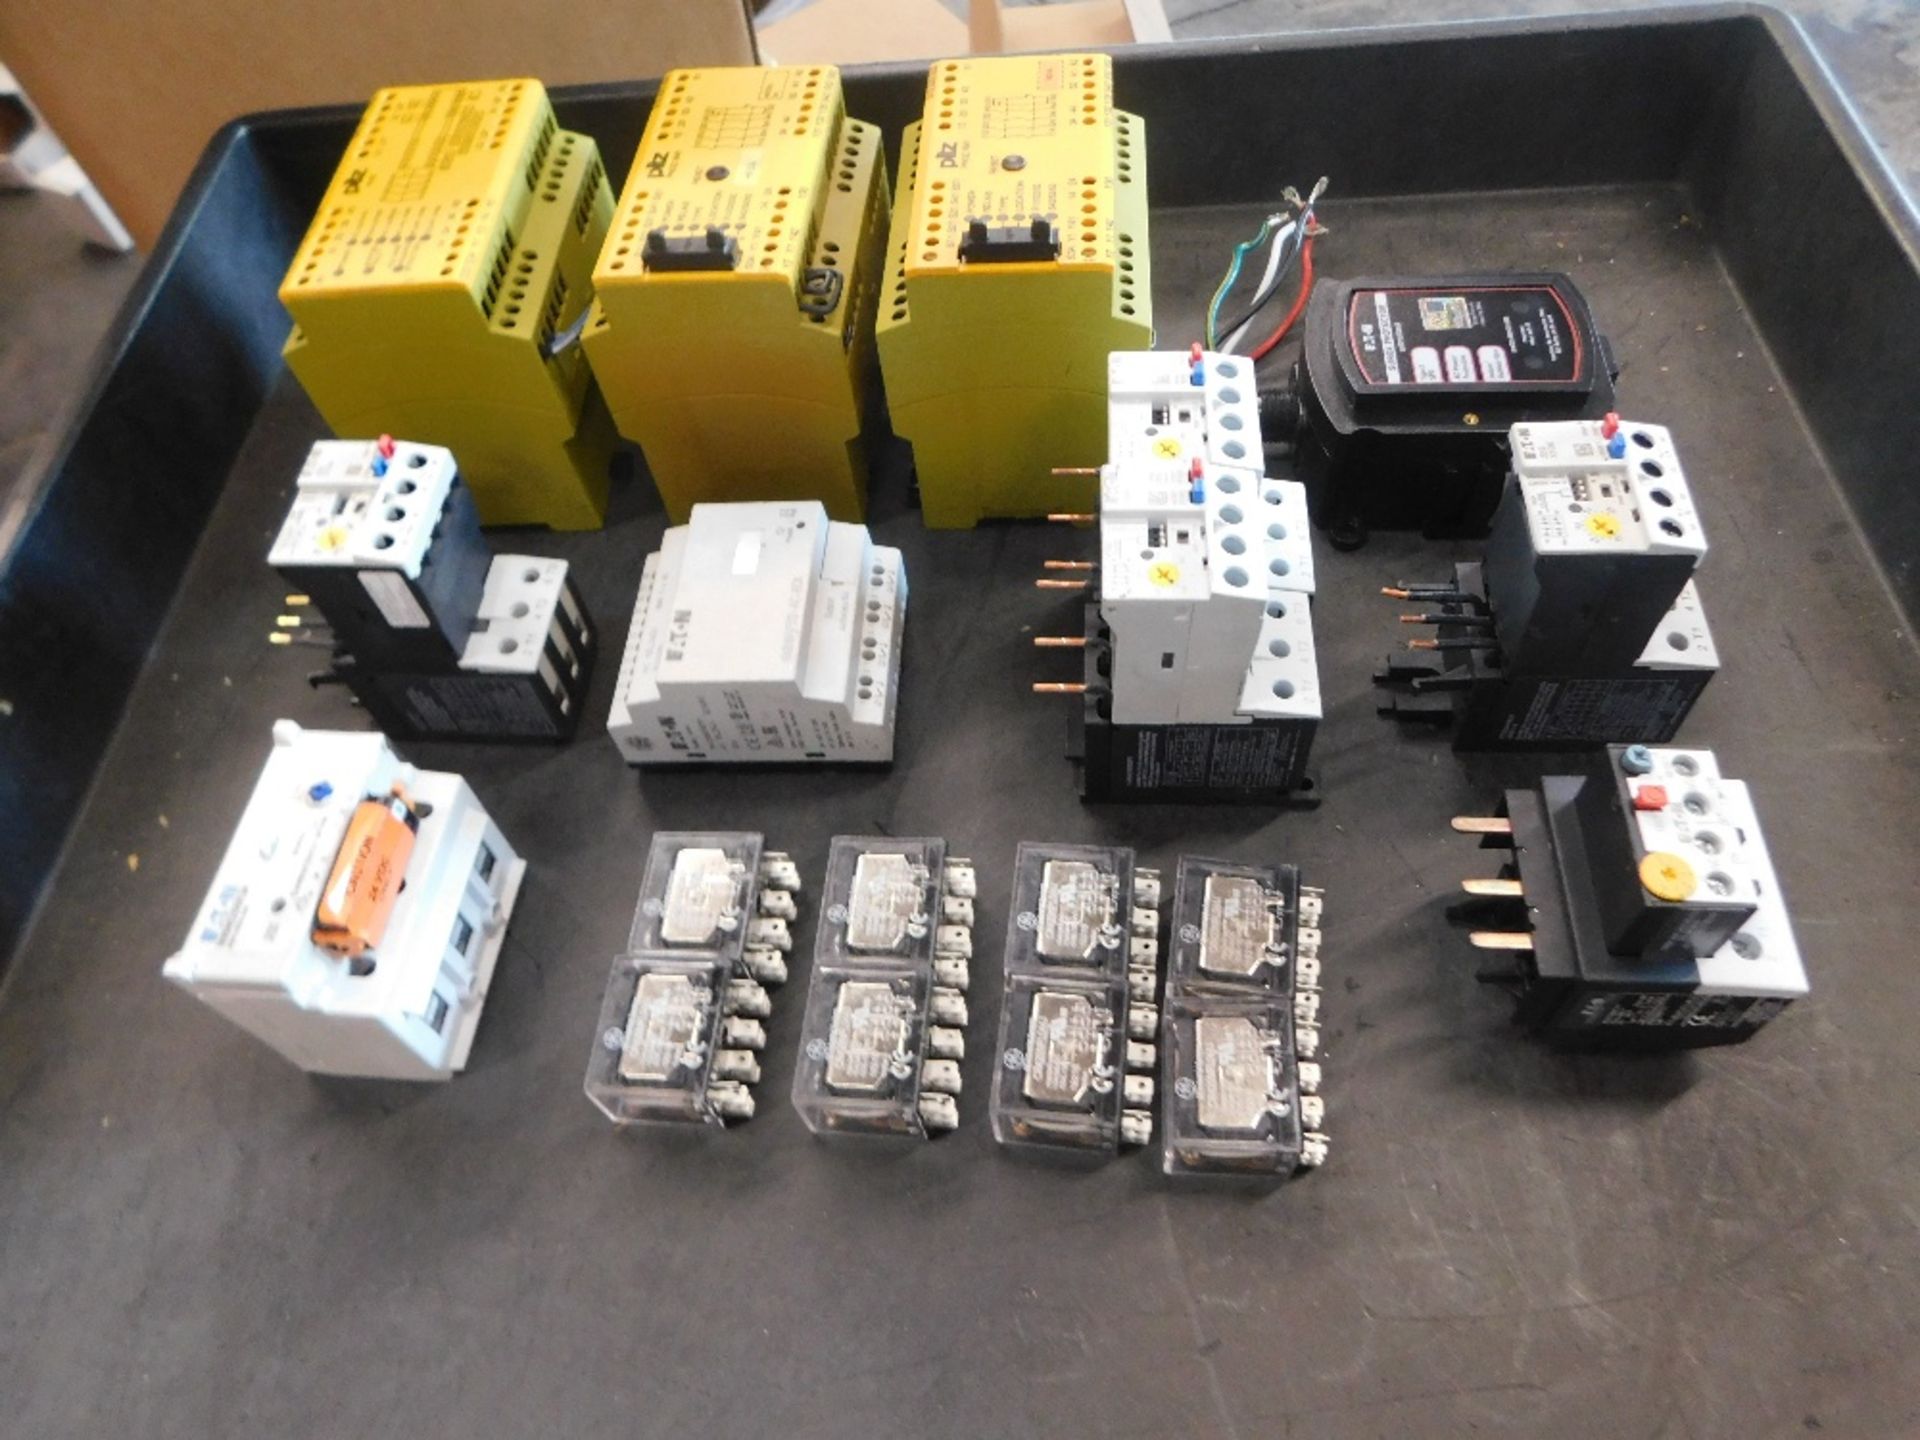 19x Eaton and Pilz Relays - Assorted Models - Image 2 of 8